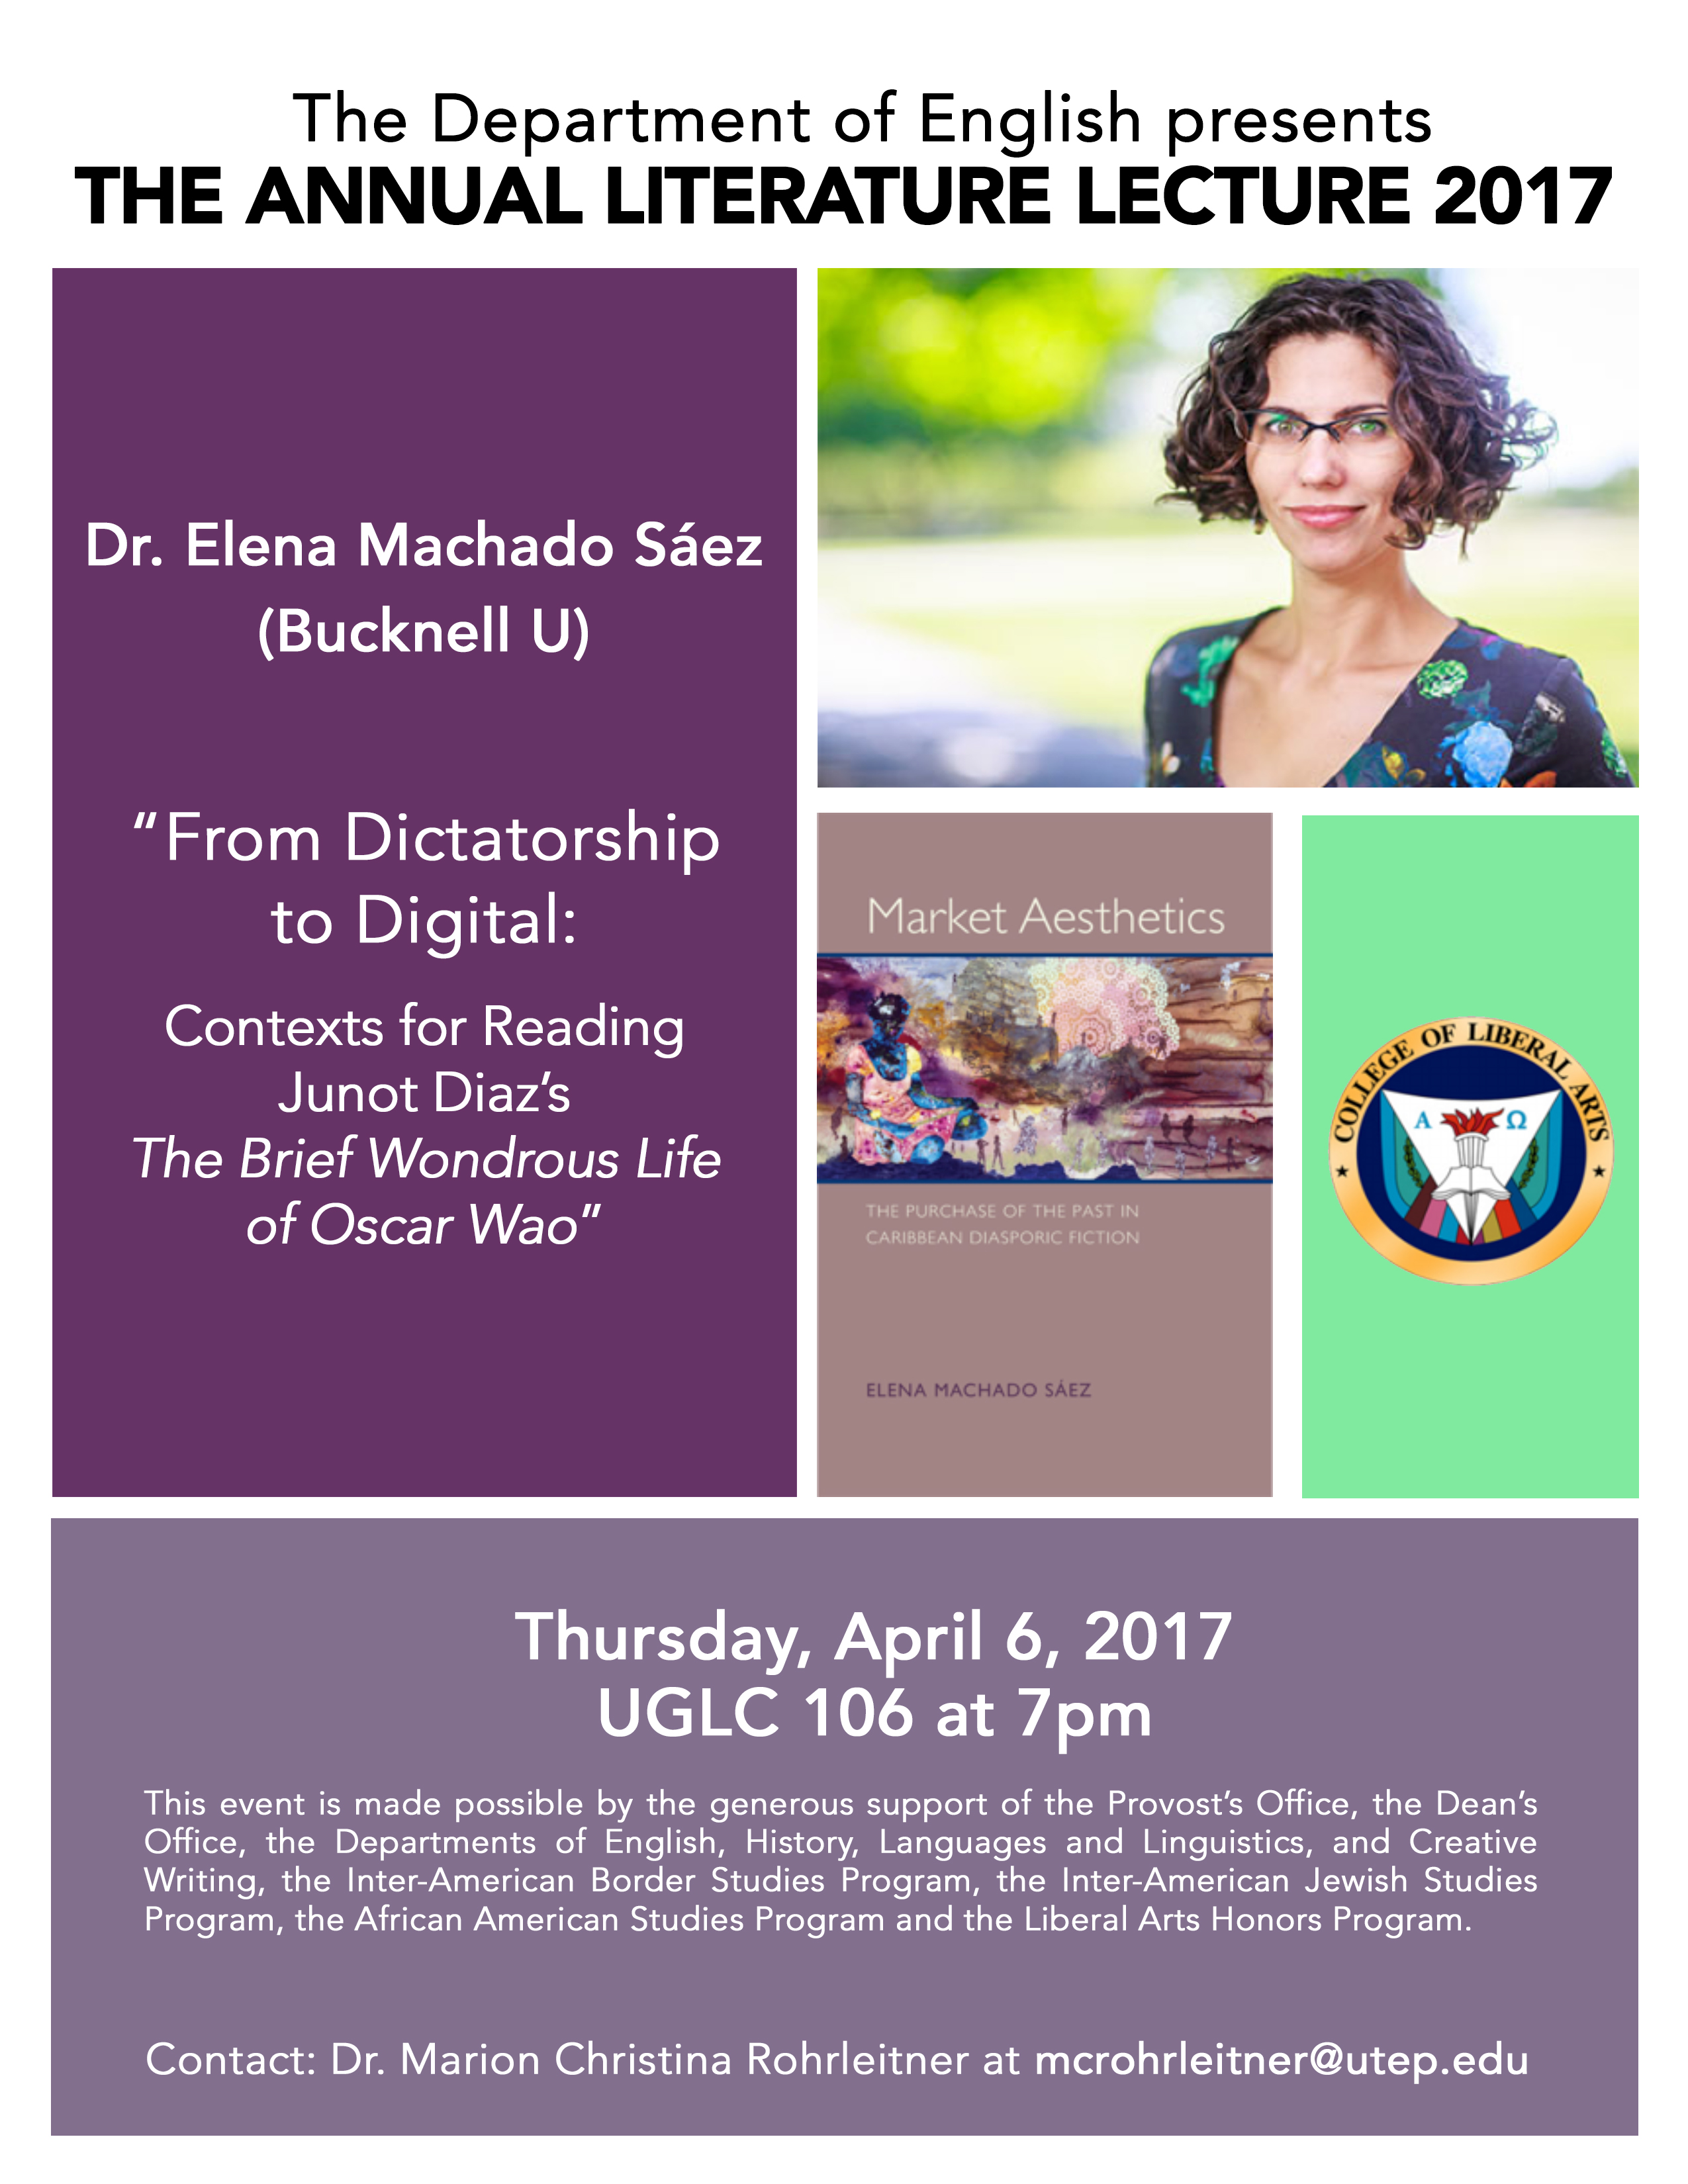 (Apr. 6, 2017) Presenting Annual Literature Lecture at University of Texas at El Paso